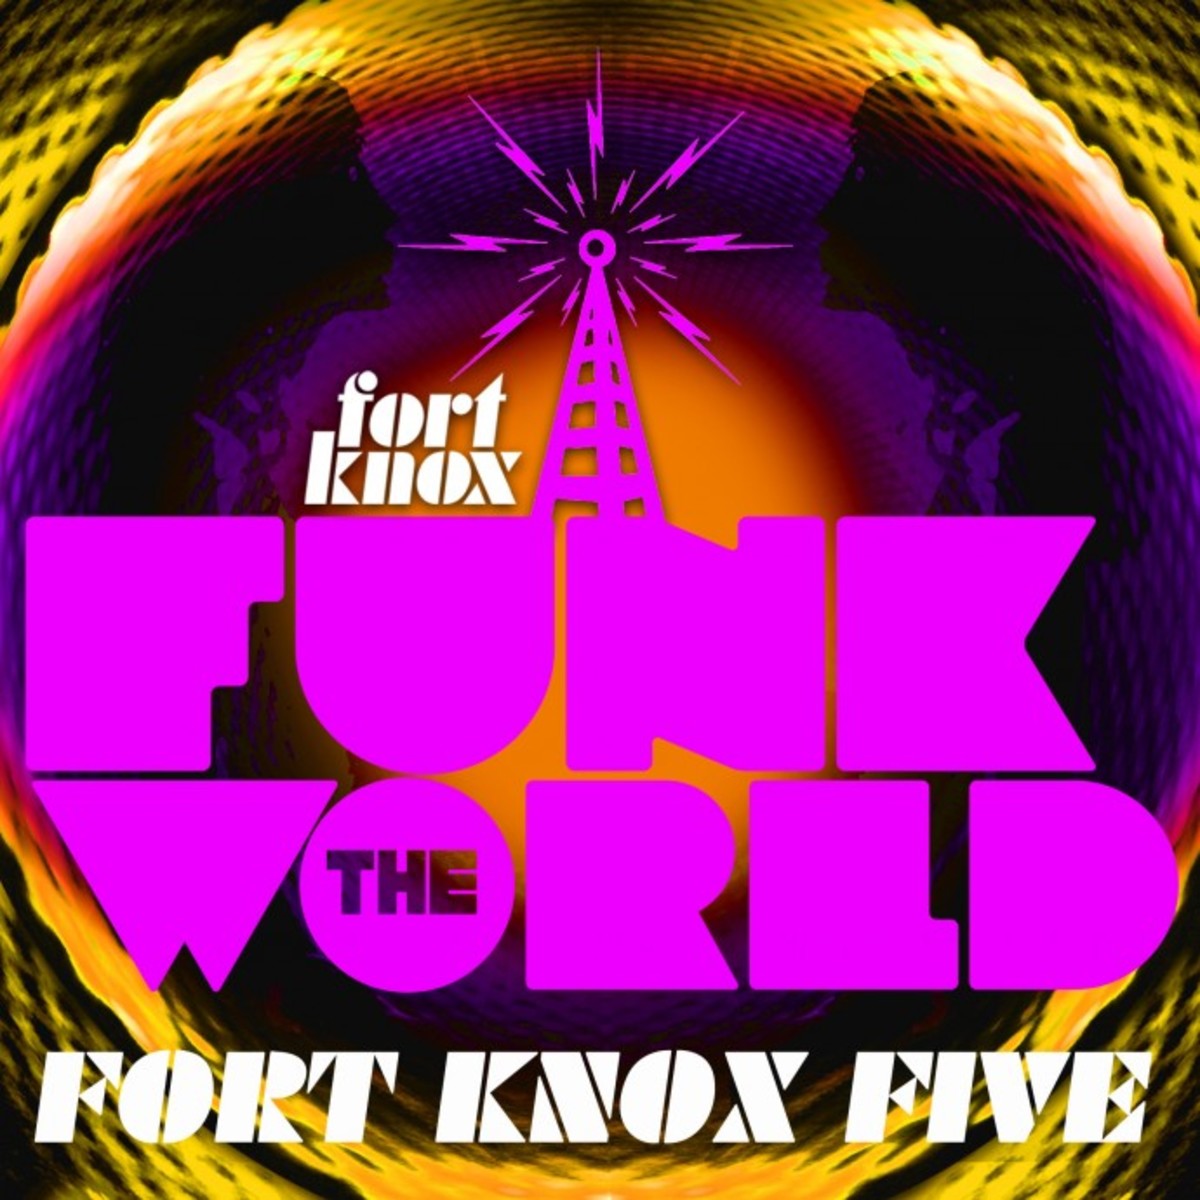 PREMIERE: Funk The World Is Sweltering